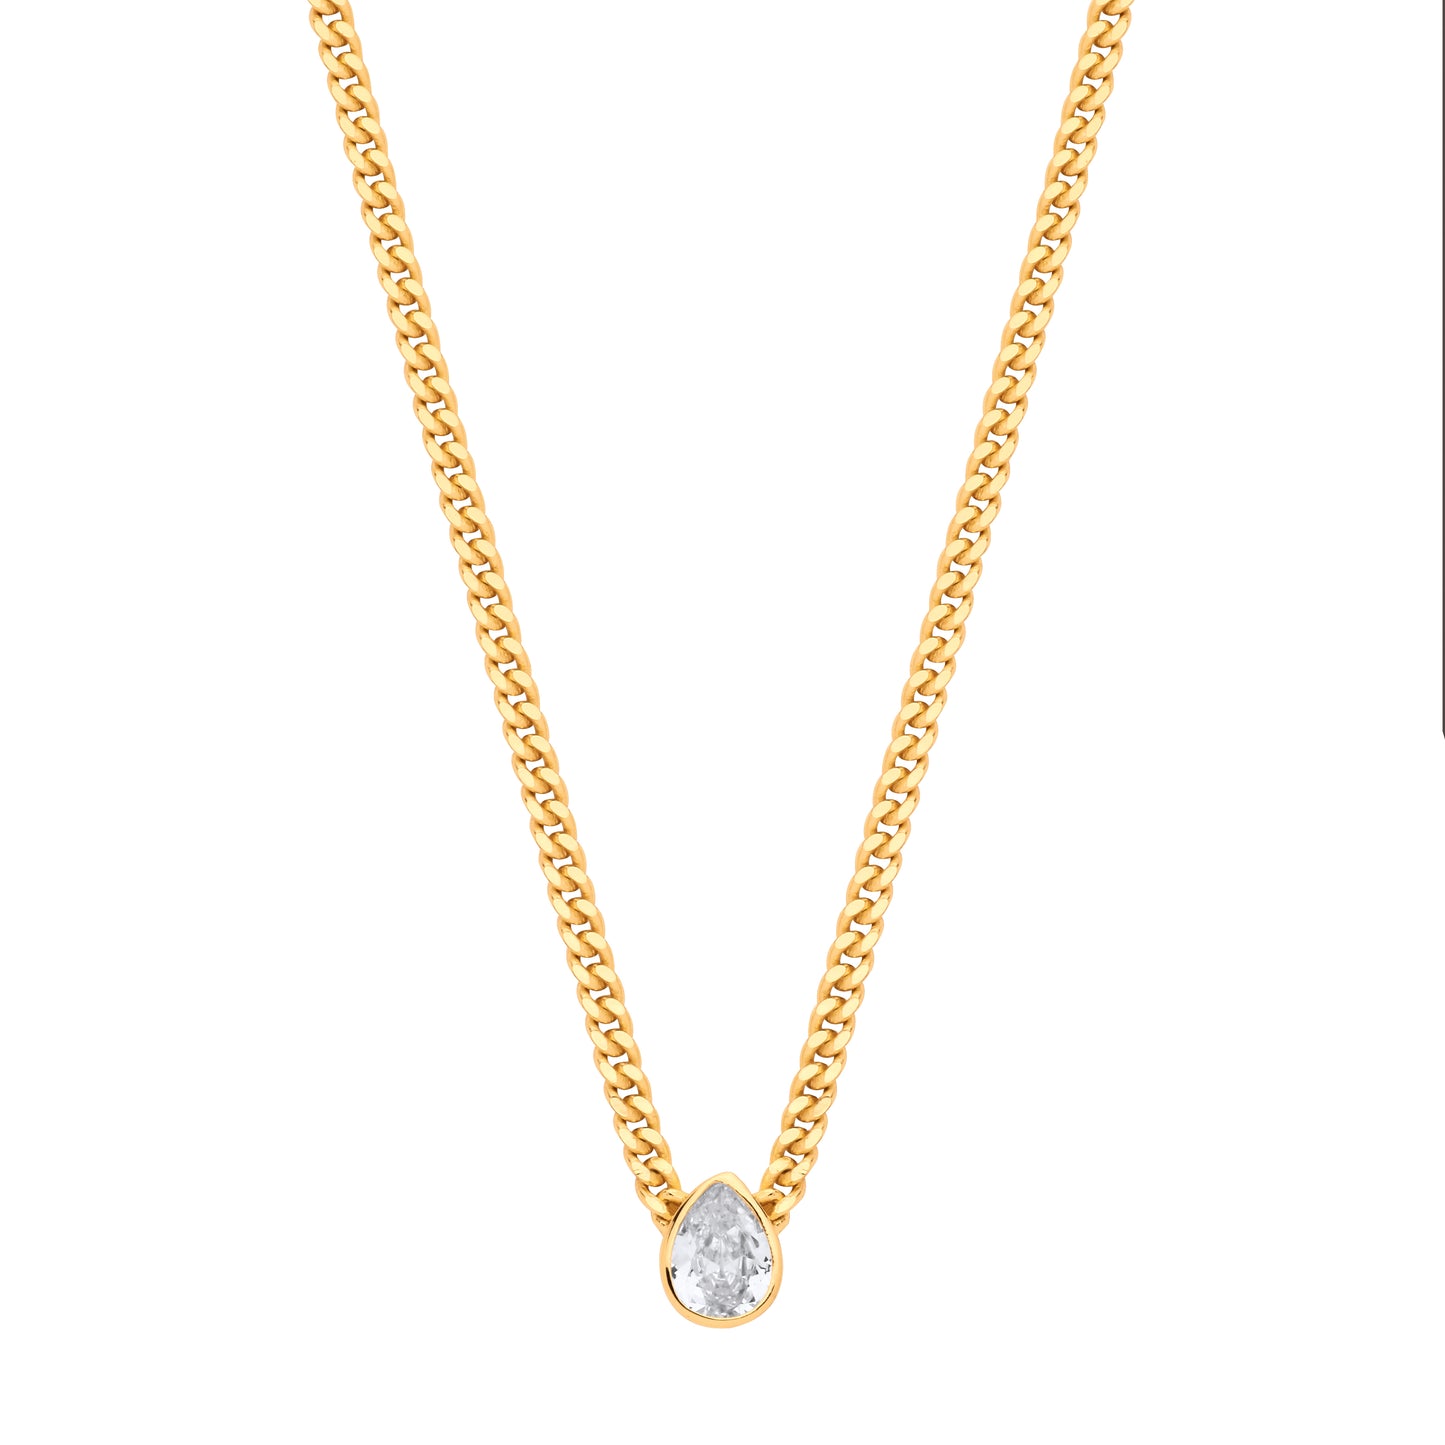 Gold-Silver Collerate Necklace Pear Drop Necklace - GVK497G